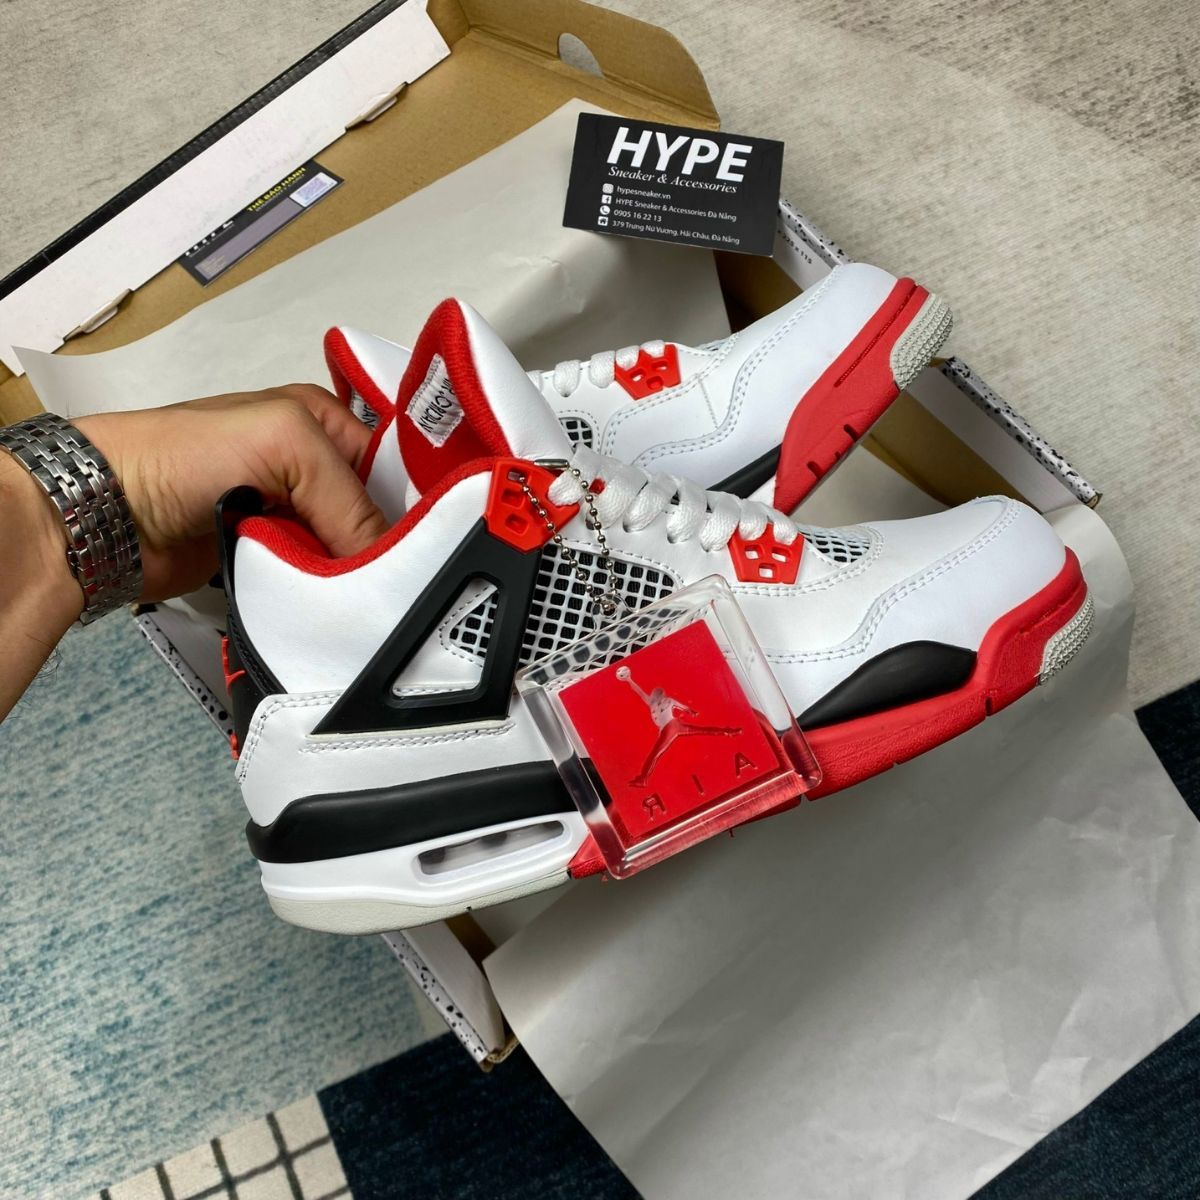 Hype Sneakers & Accessories